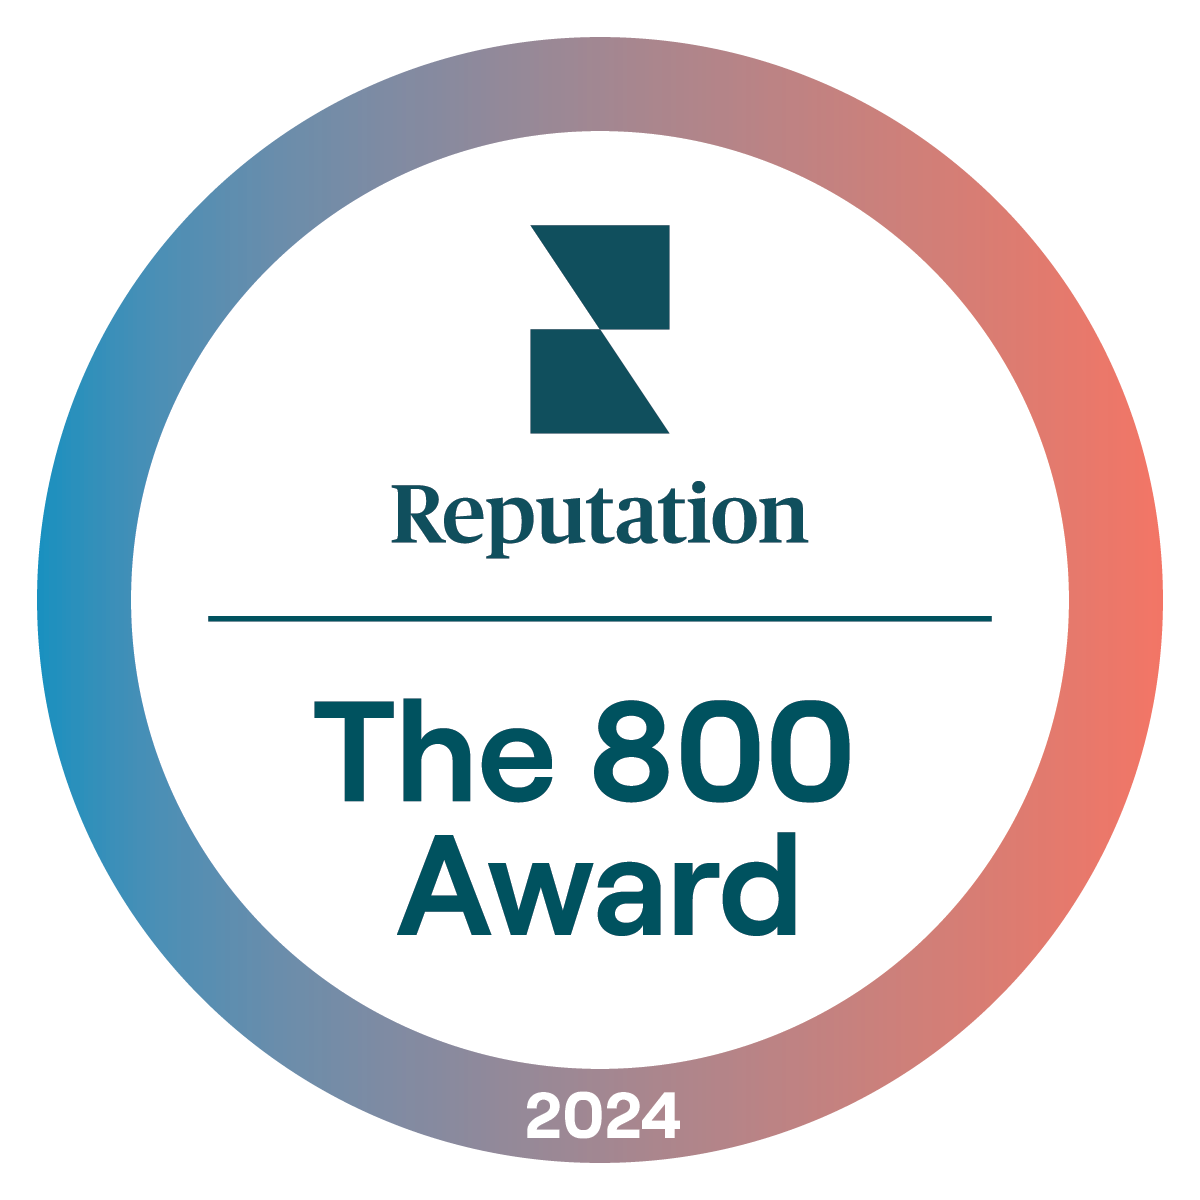 The 800 Award 2022 from Reputation